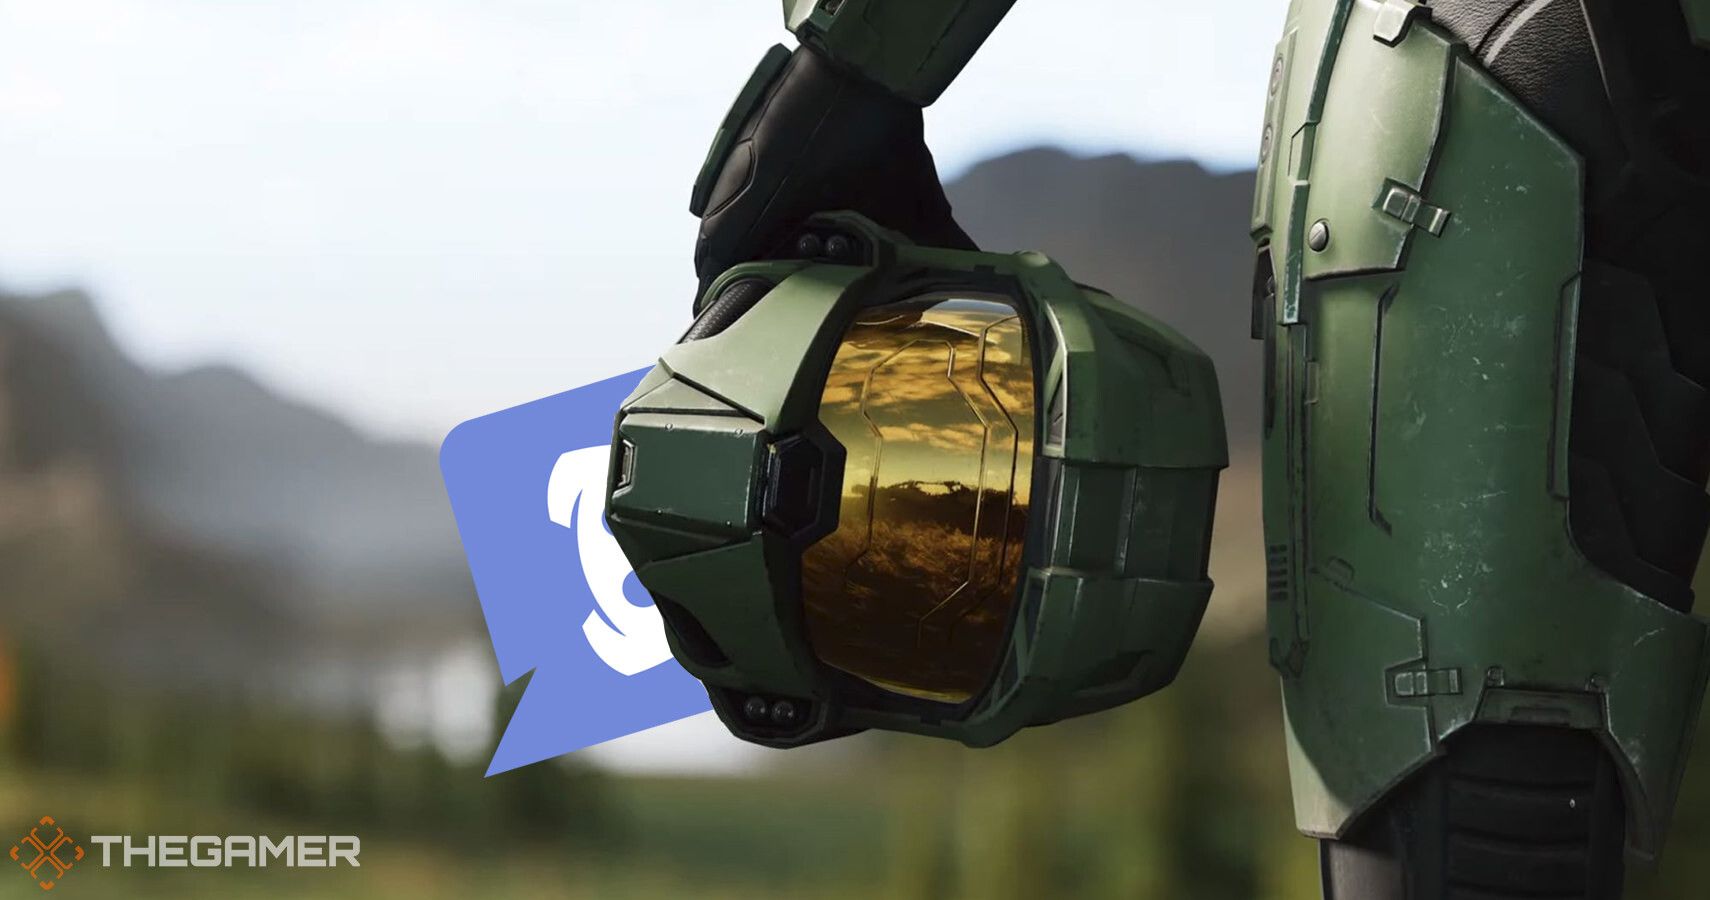 Halo Infinite Will Integrate Discord Features On PC Despite Pass On Microsoft Purchase